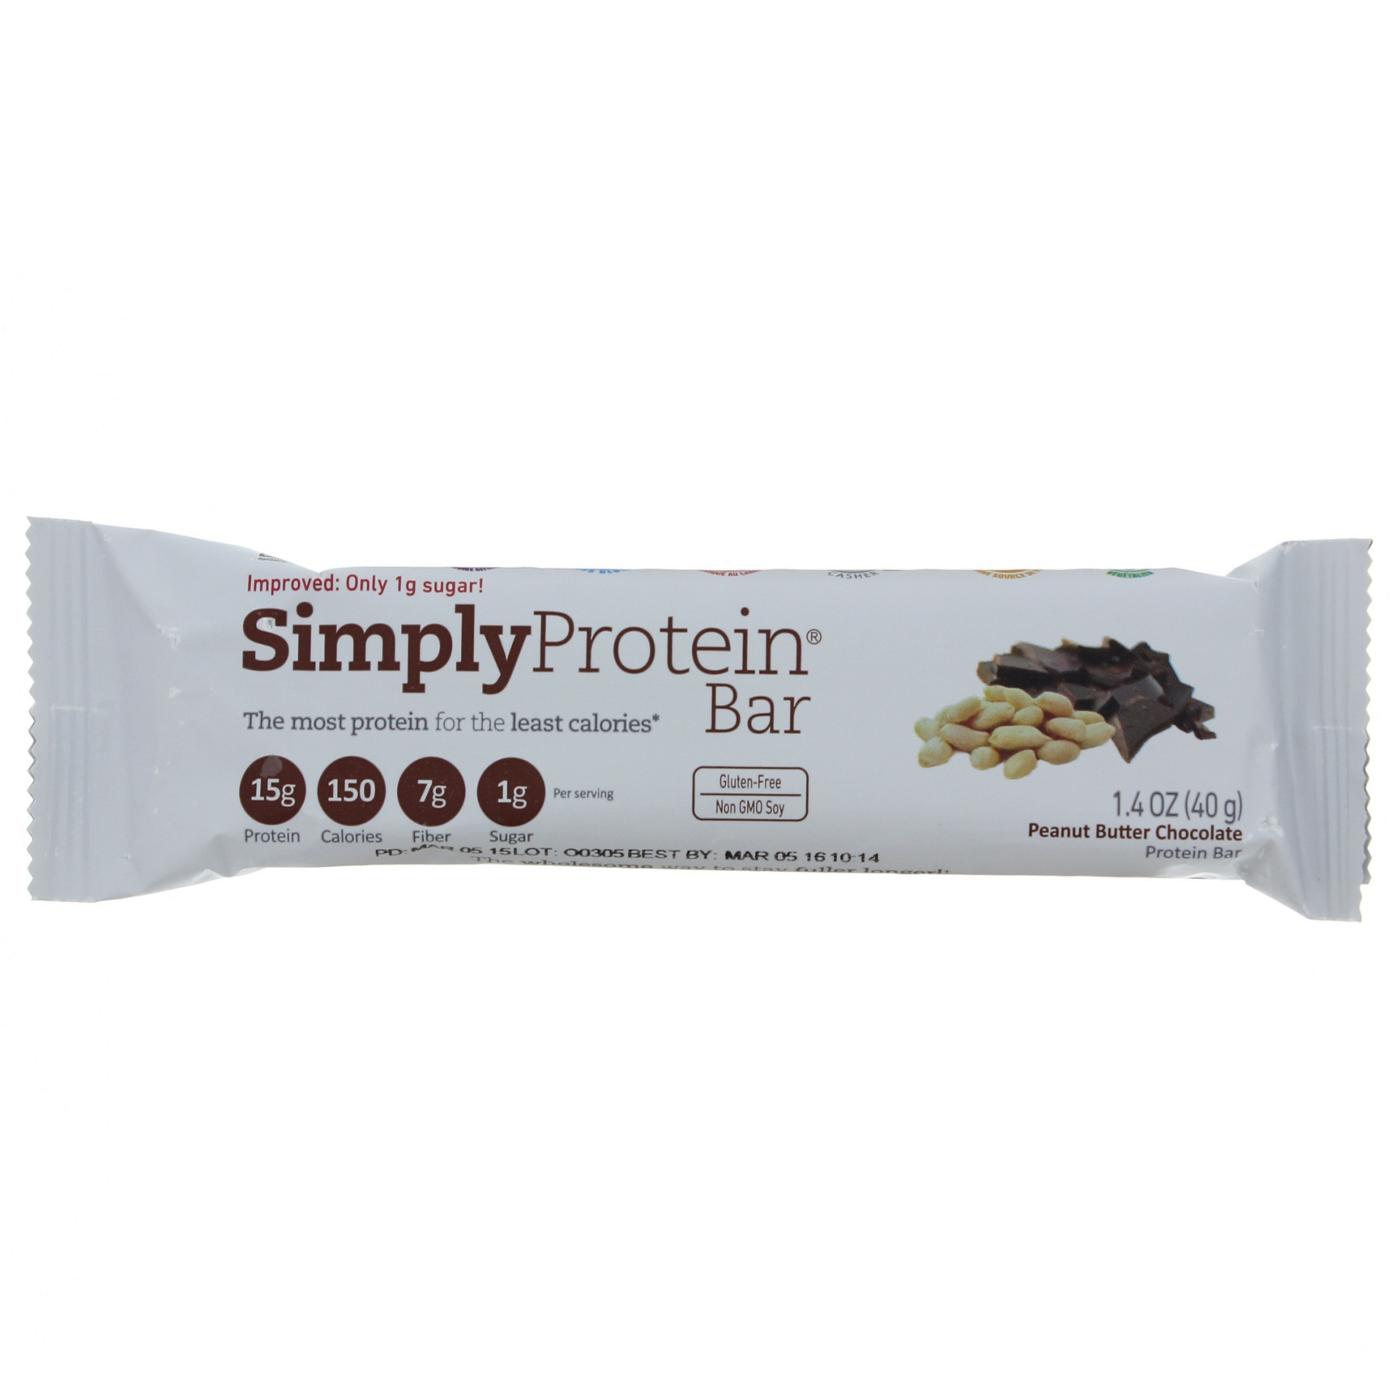 Simply Protein Bar - Chocolate Peanut Butter; image 1 of 2